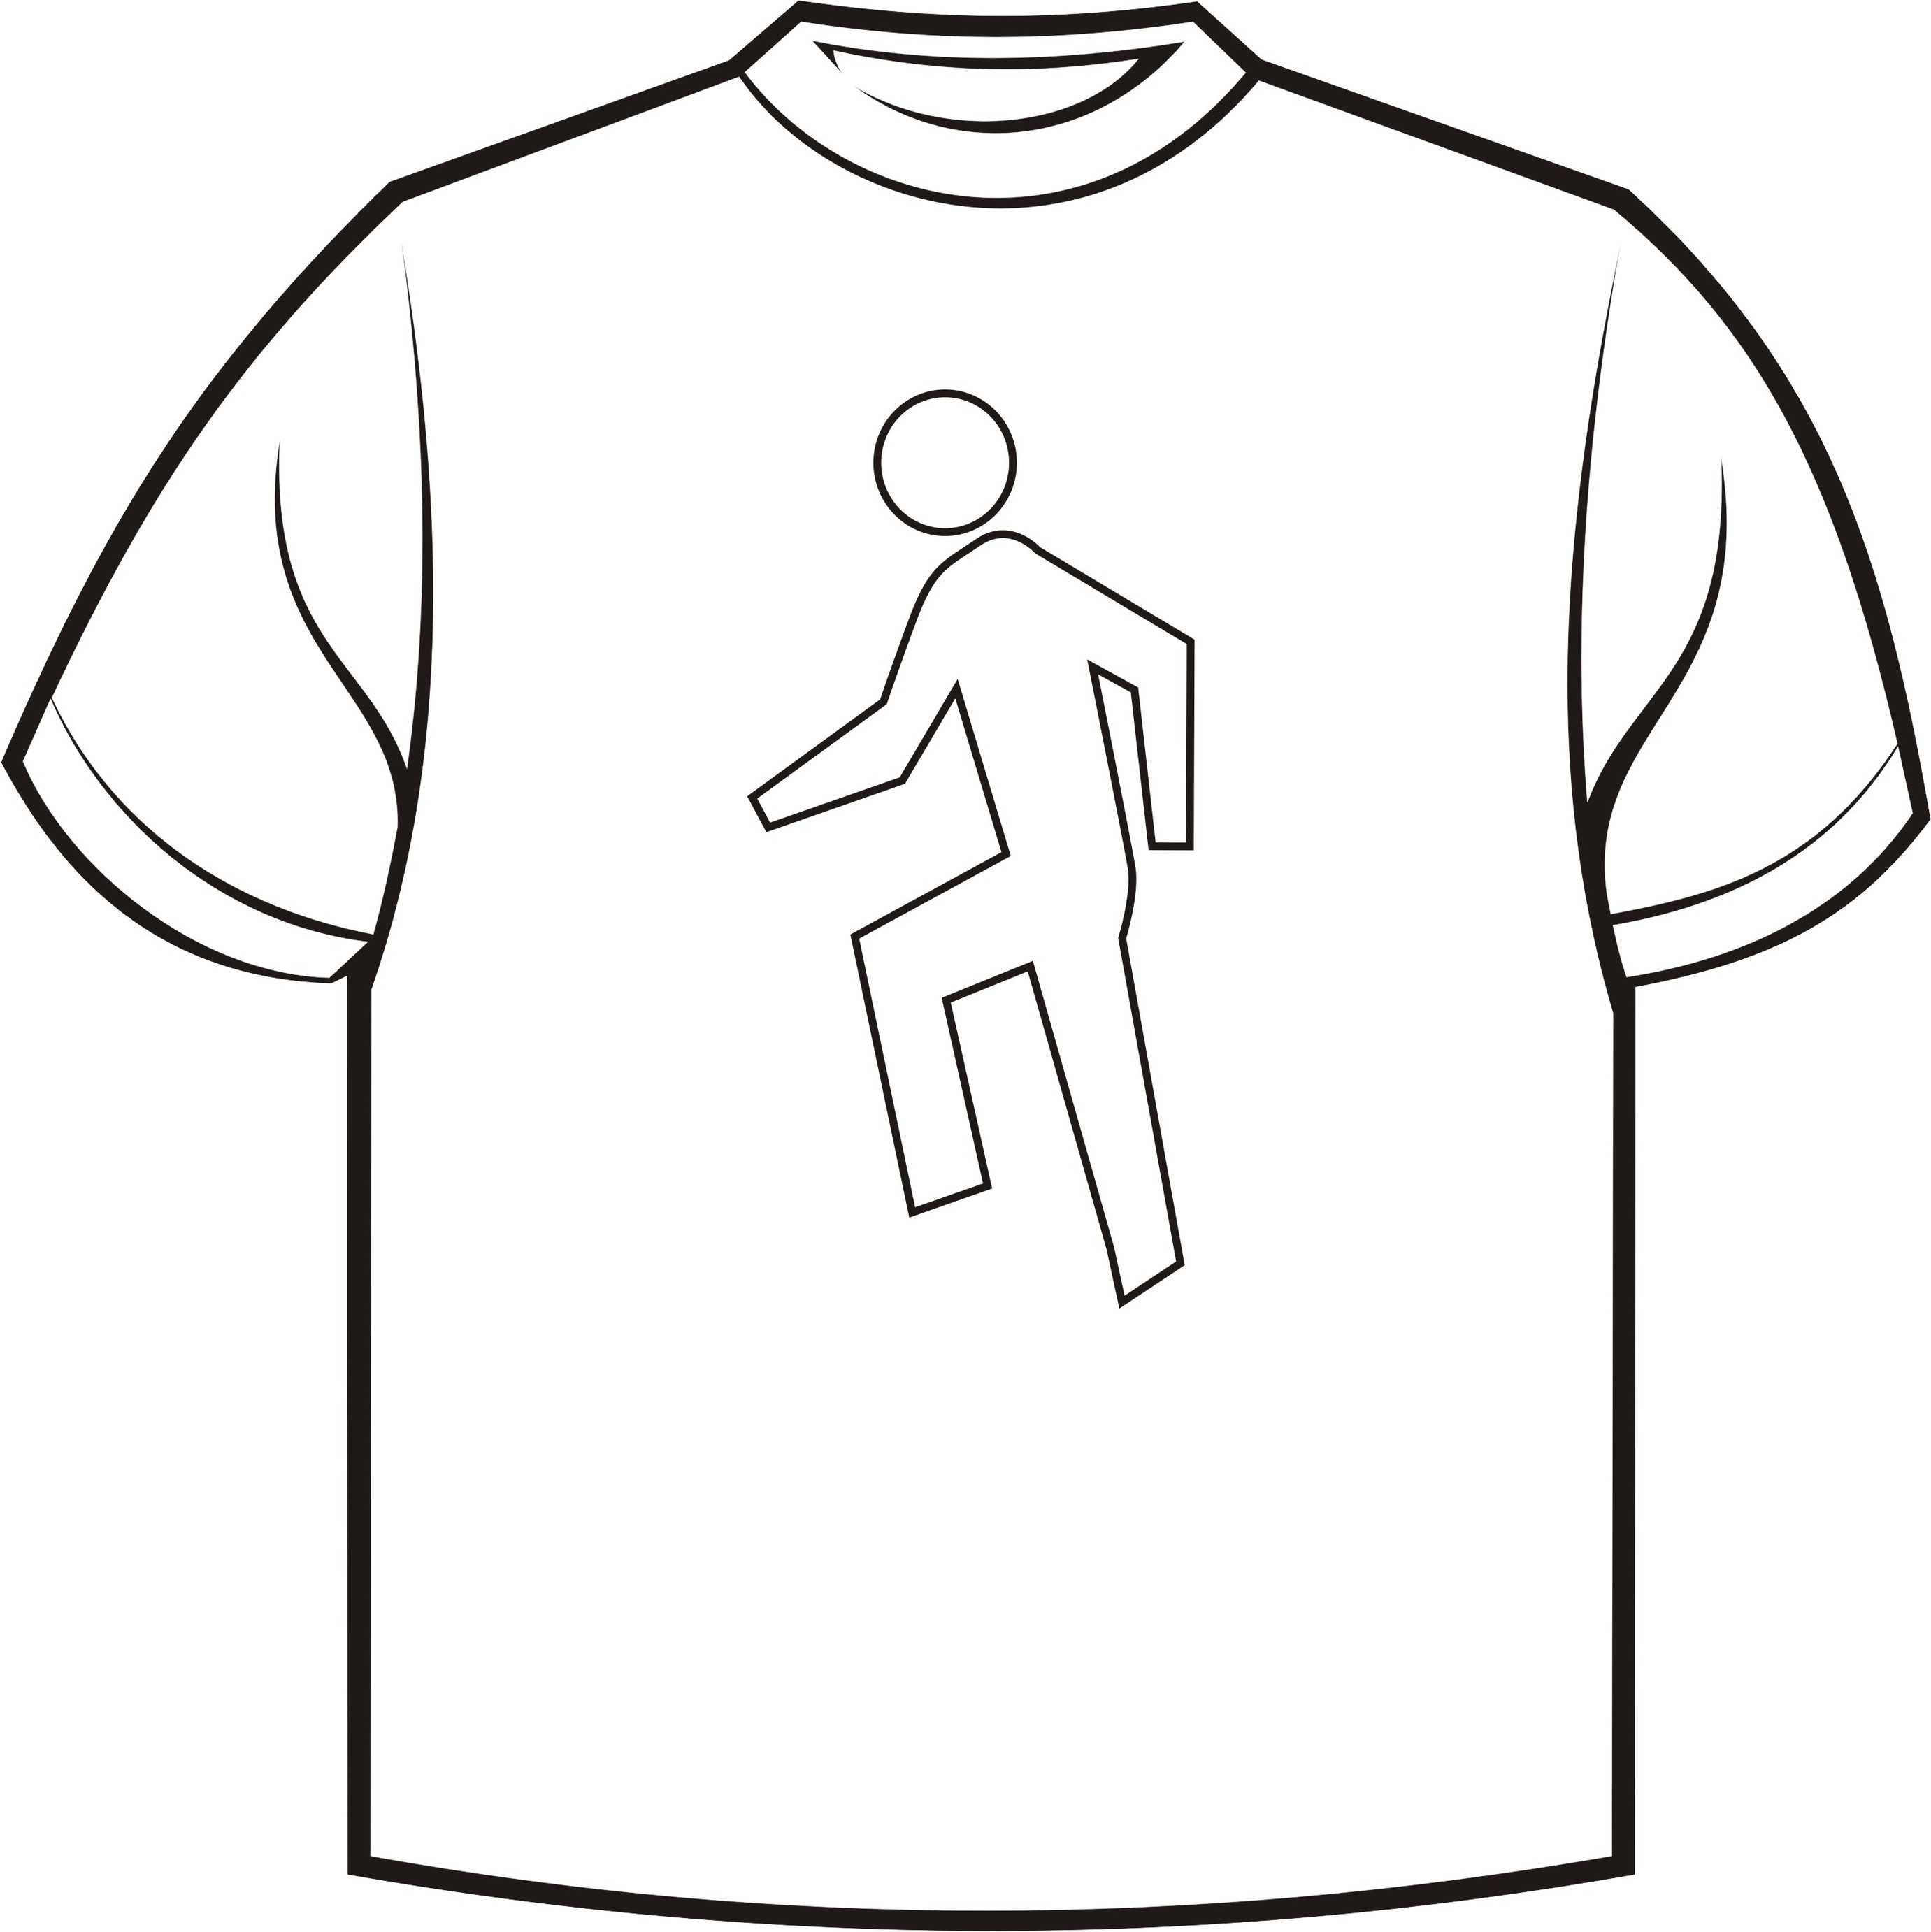 Blank White T Shirt Clipart - Free to use Clip Art Resource